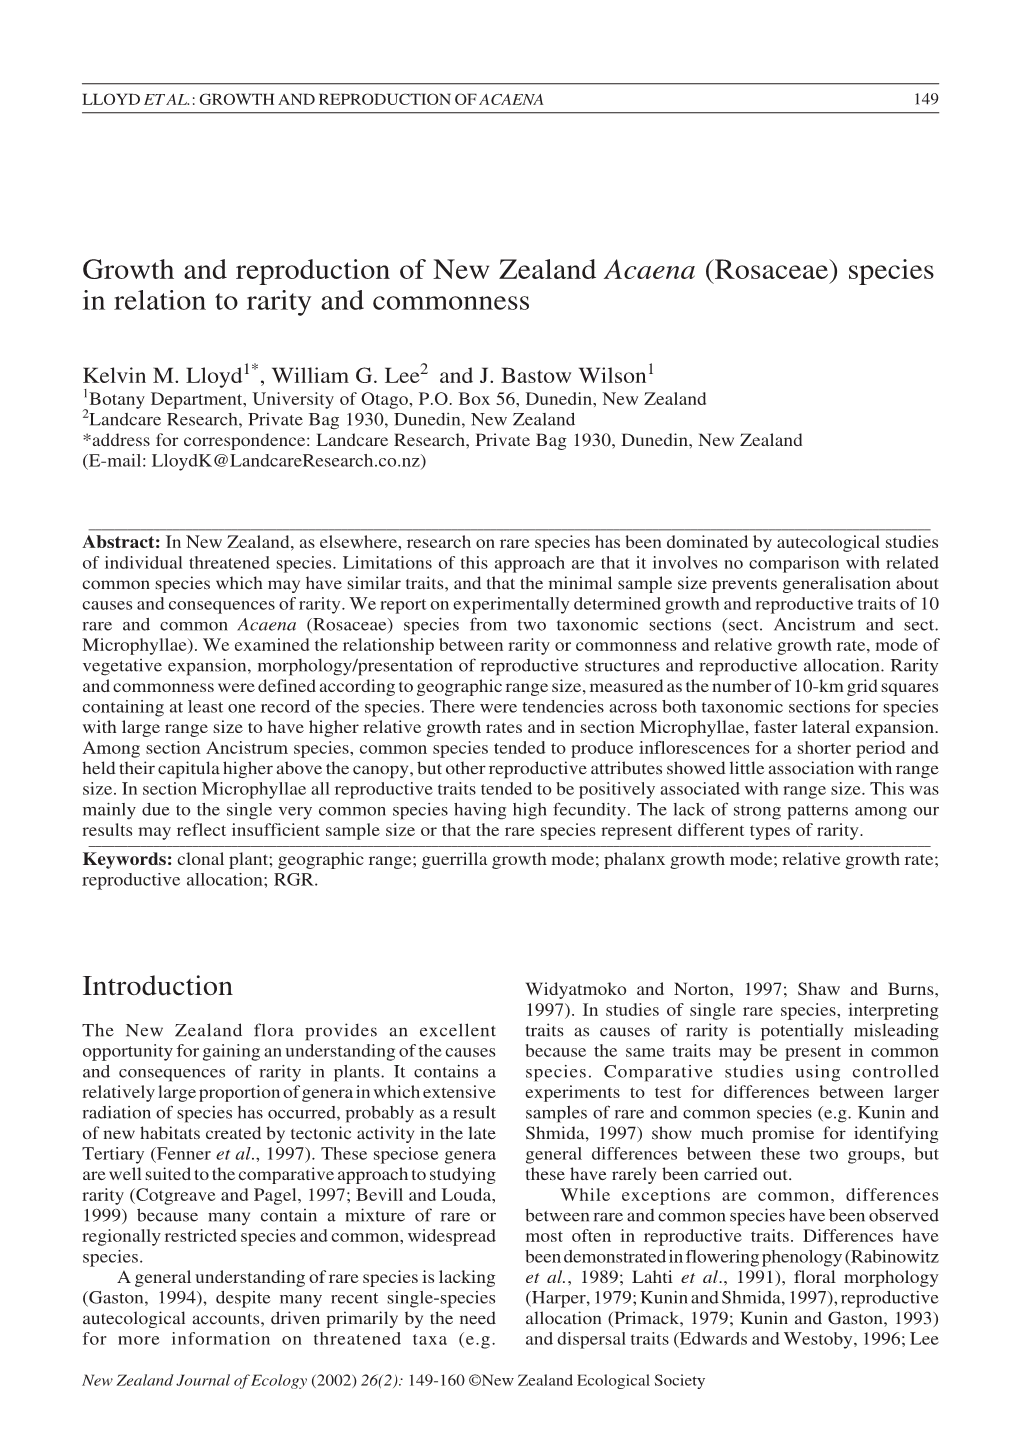 Growth and Reproduction of New Zealand Acaena (Rosaceae) Species in Relation to Rarity and Commonness